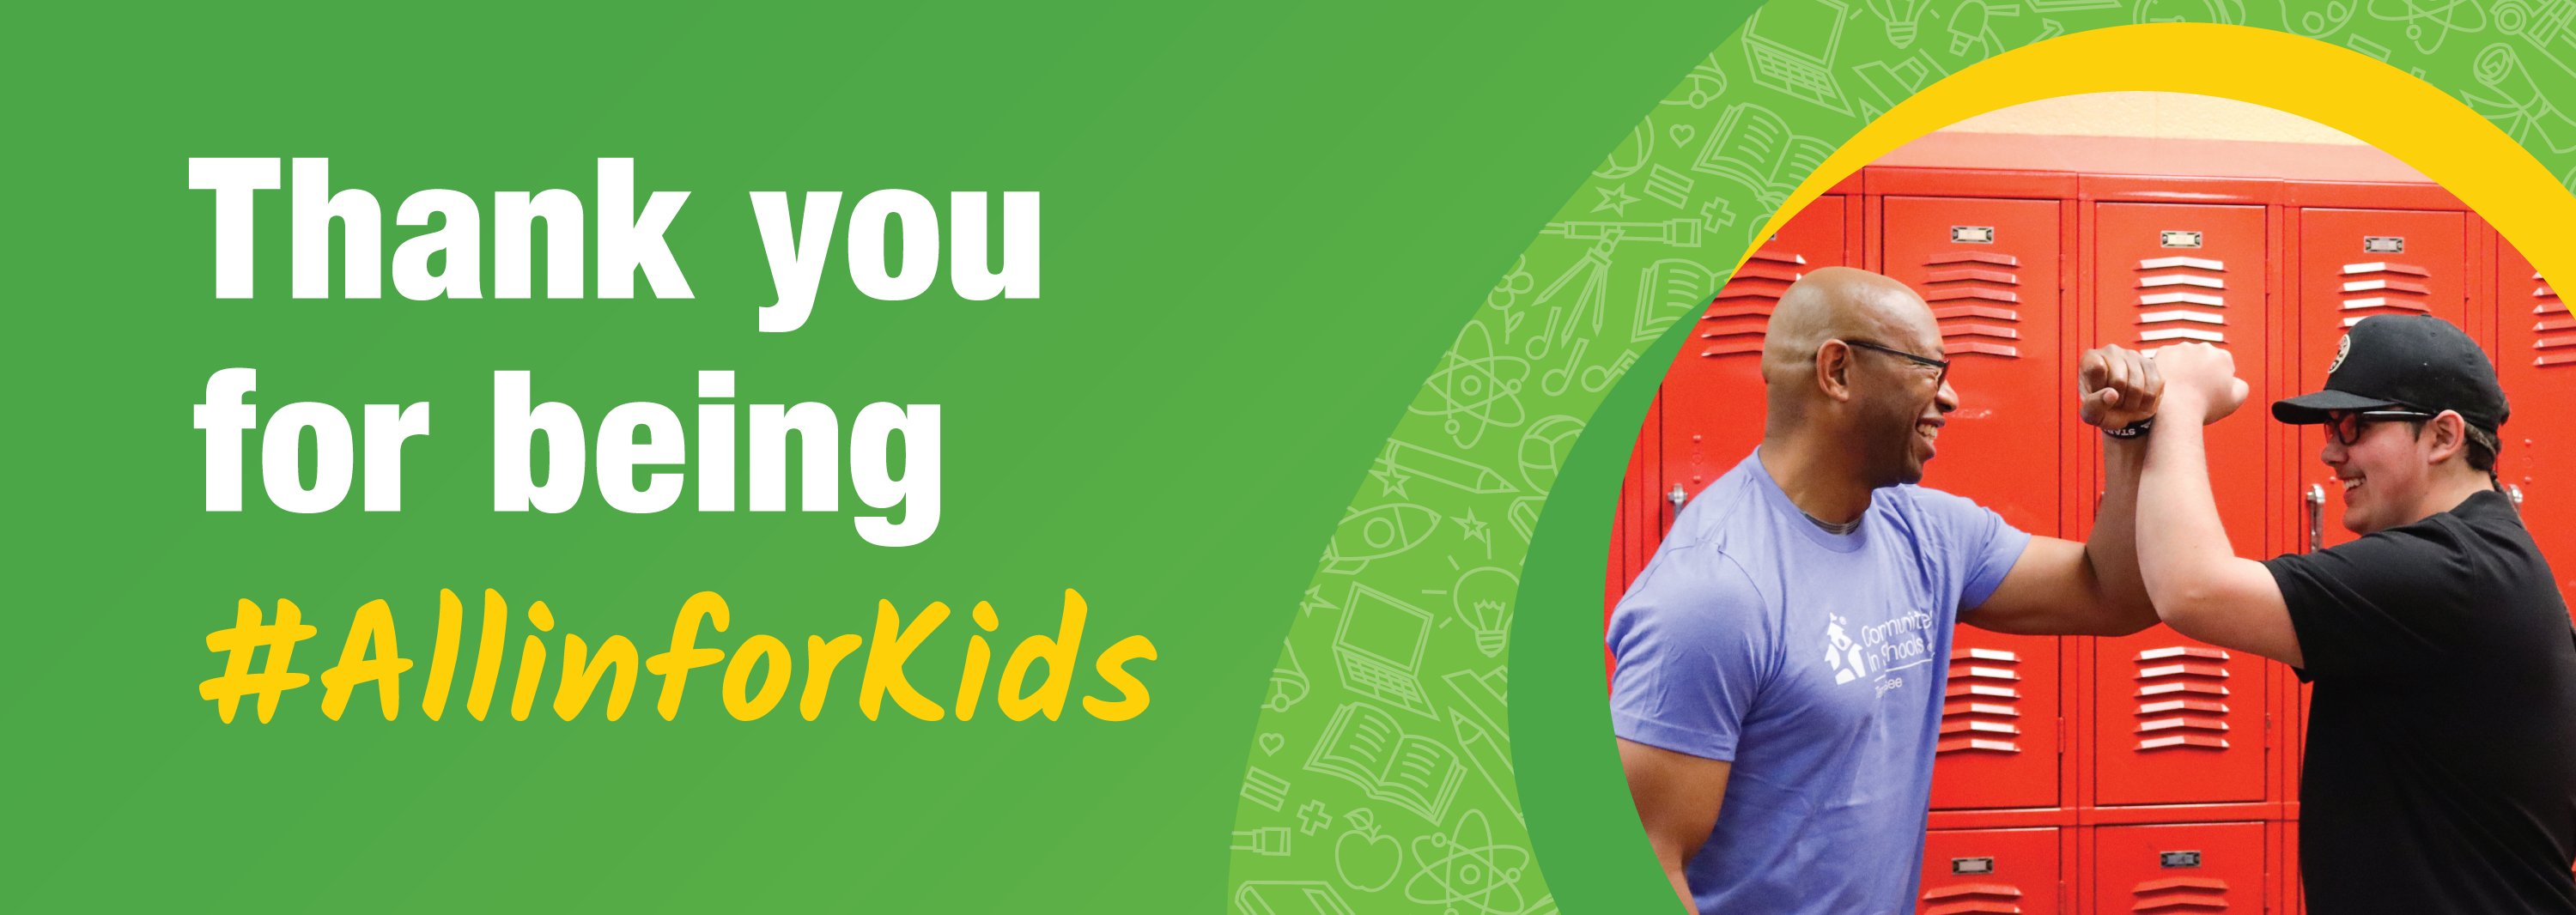 Thank you for being #AllinforKids!